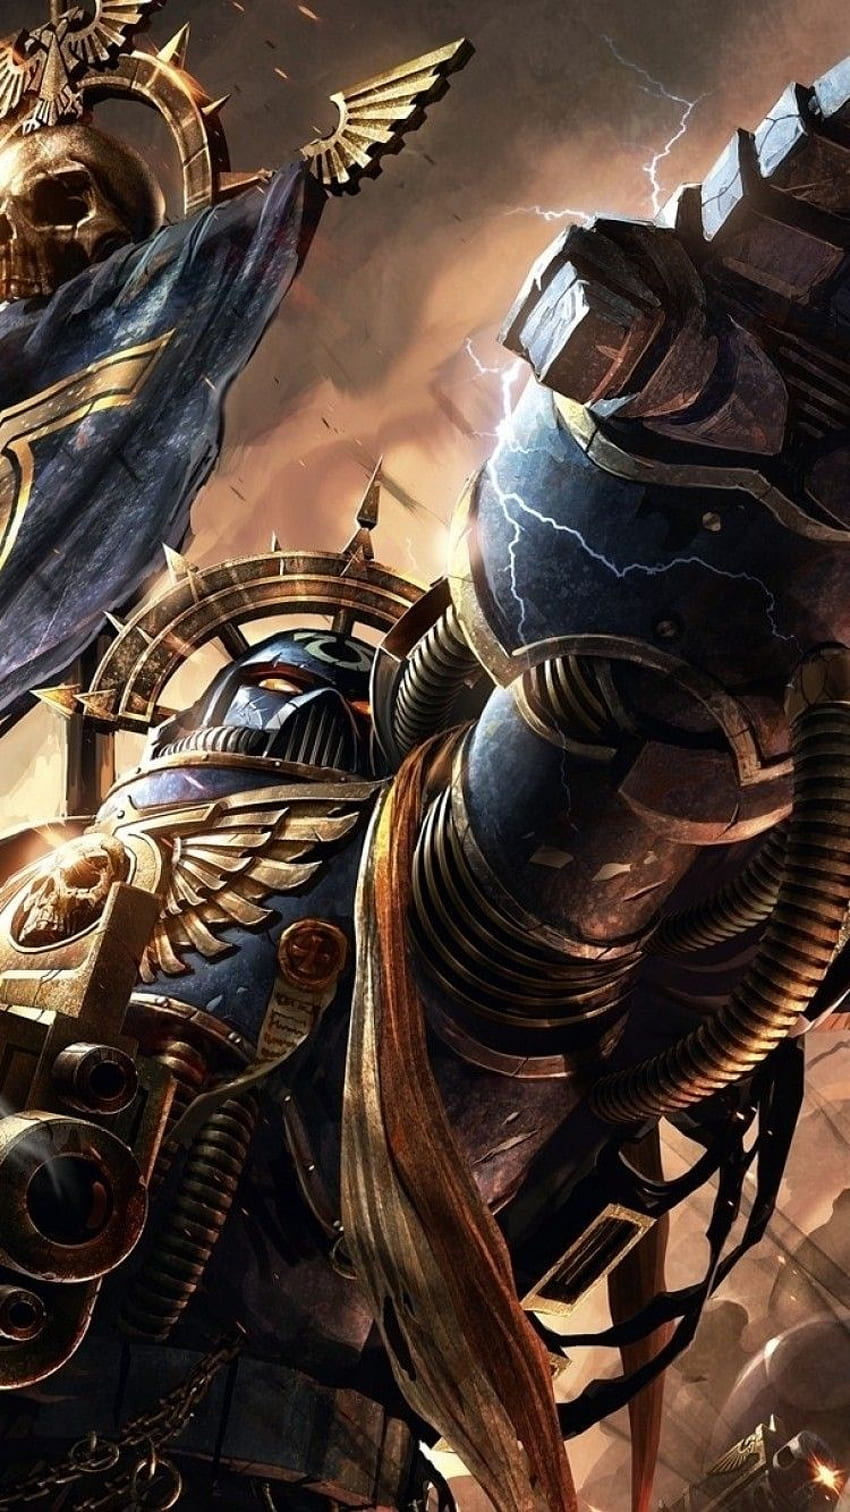 WallpapersWidecom  High Resolution Desktop Wallpapers tagged with warhammer  40k  Page 1